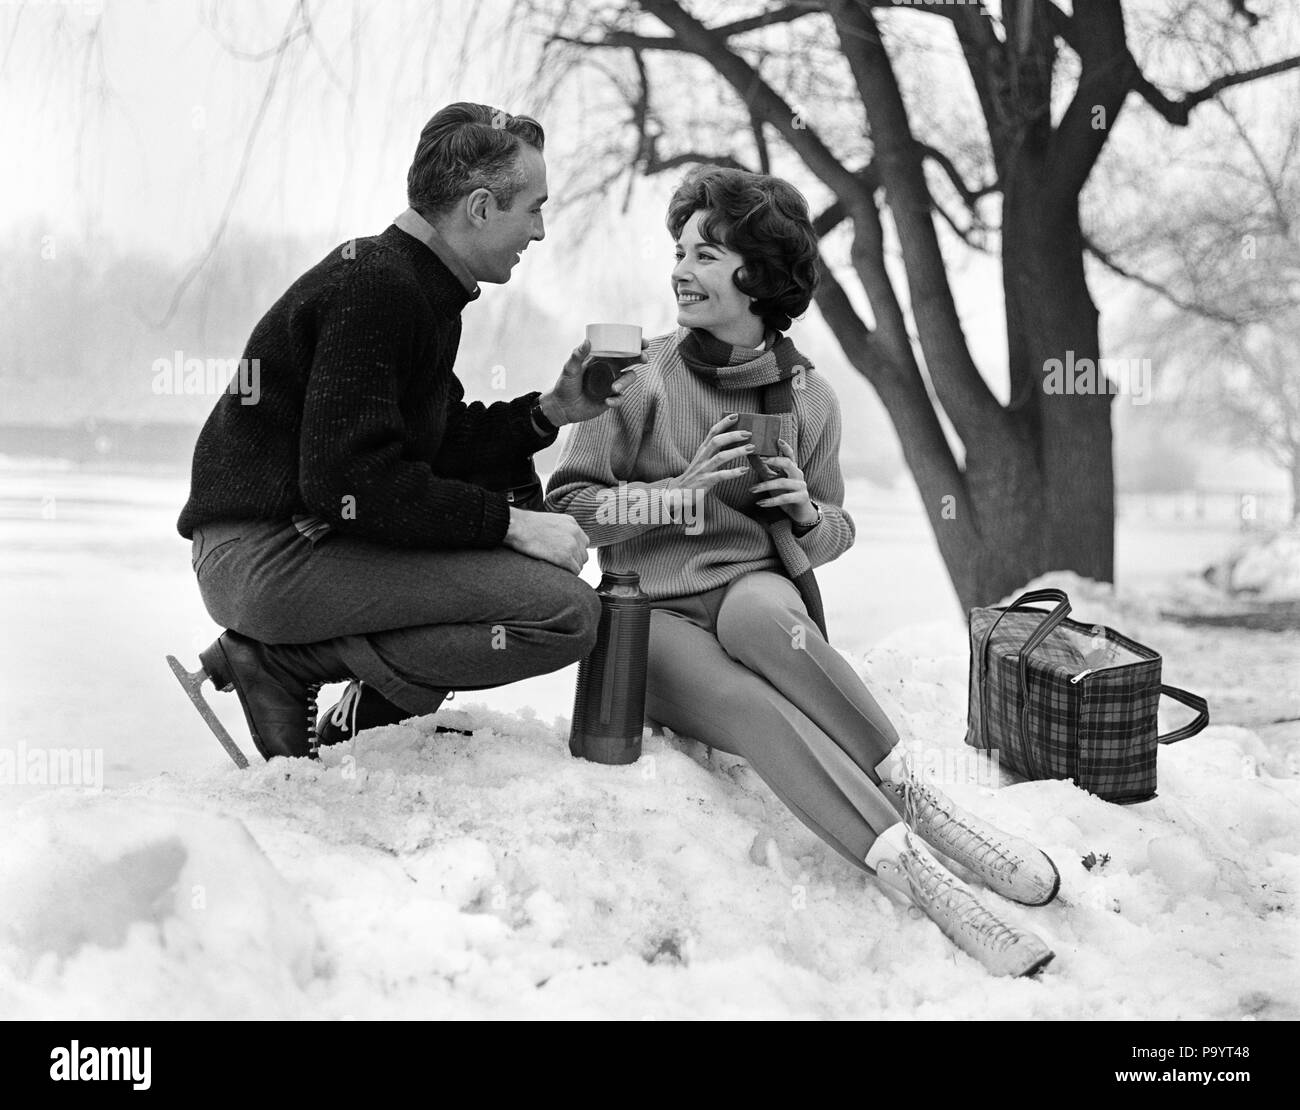 1960s SMILING COUPLE IN SNOW WEARING ICE SKATES DRINKING HOT BEVERAGE FROM THERMOS - bw00113 CAM001 HARS FRIENDSHIP HALF-LENGTH LADIES PERSONS MALES B&W WINTERTIME DATING HAPPINESS CHEERFUL EXCITEMENT RECREATION CAM001 SMILES JOYFUL STYLISH MID-ADULT MID-ADULT MAN MID-ADULT WOMAN TOGETHERNESS WIVES BLACK AND WHITE CAUCASIAN ETHNICITY OLD FASHIONED Stock Photo